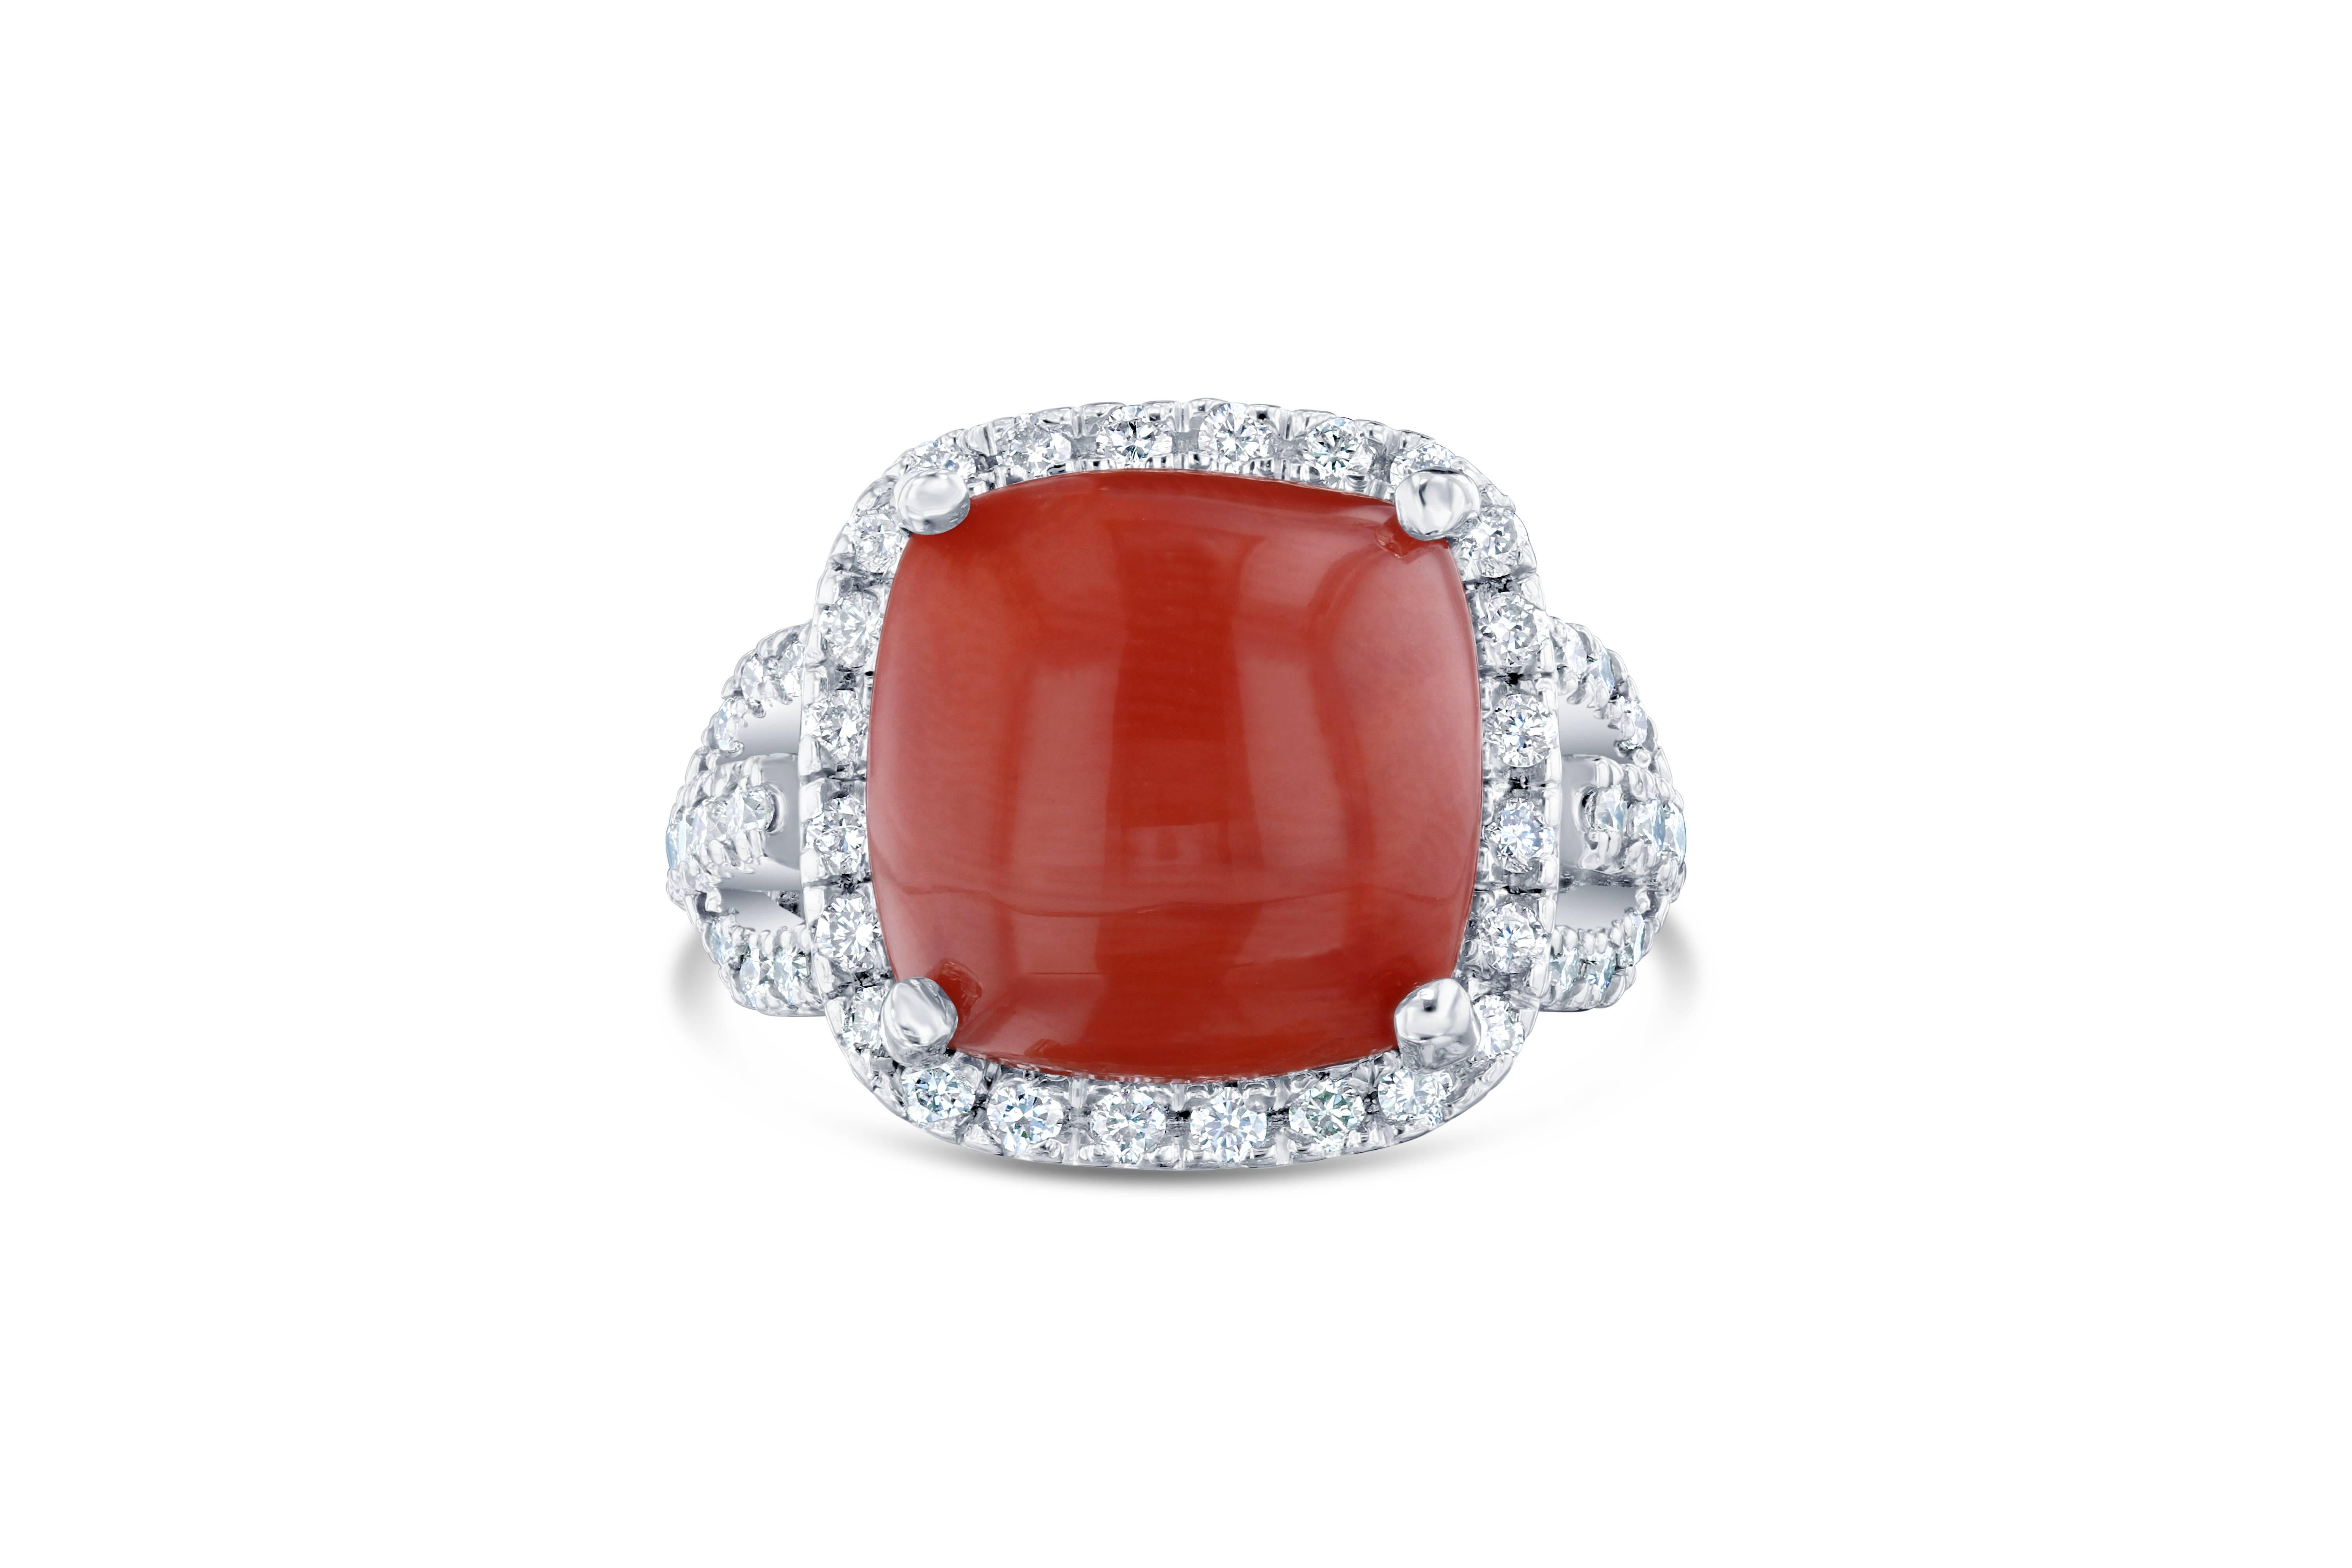 This exquisite Coral Ring is sure to be a stopper at any occasion! The Coral weighs 9.26 Carats and is adorned by 50 Round Cut White Diamonds weighing 1.01 Carats, with a clarity and color of VS-H. The Total Carat Weight of this beauty is 10.27